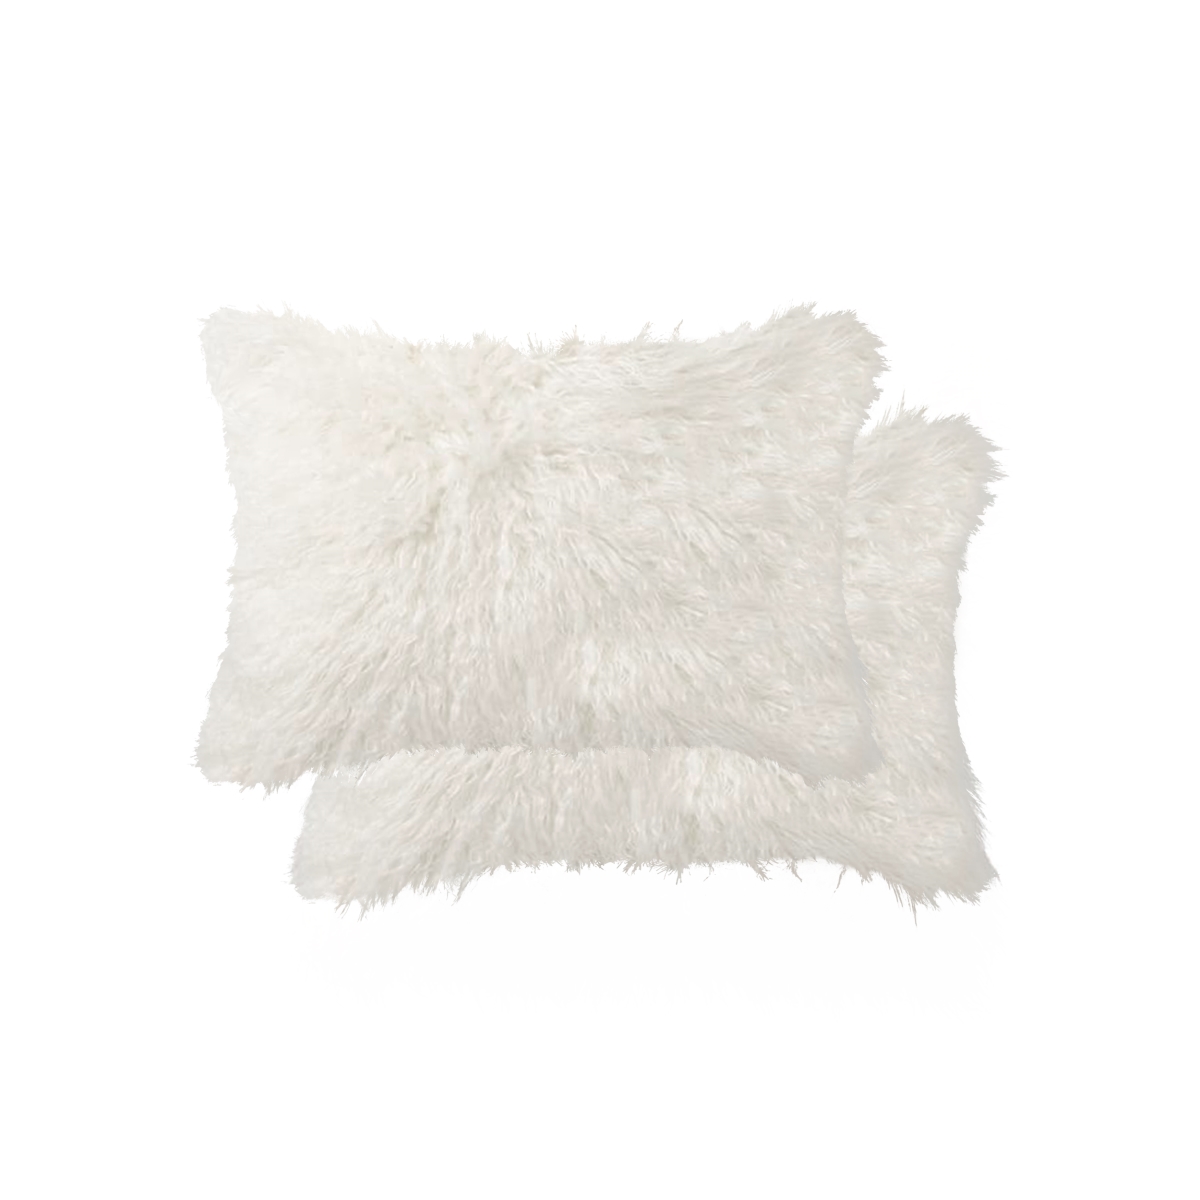 Home Roots 317293 12 Ft. X 20 In. Fur Pillow, Off White - Pack Of 2